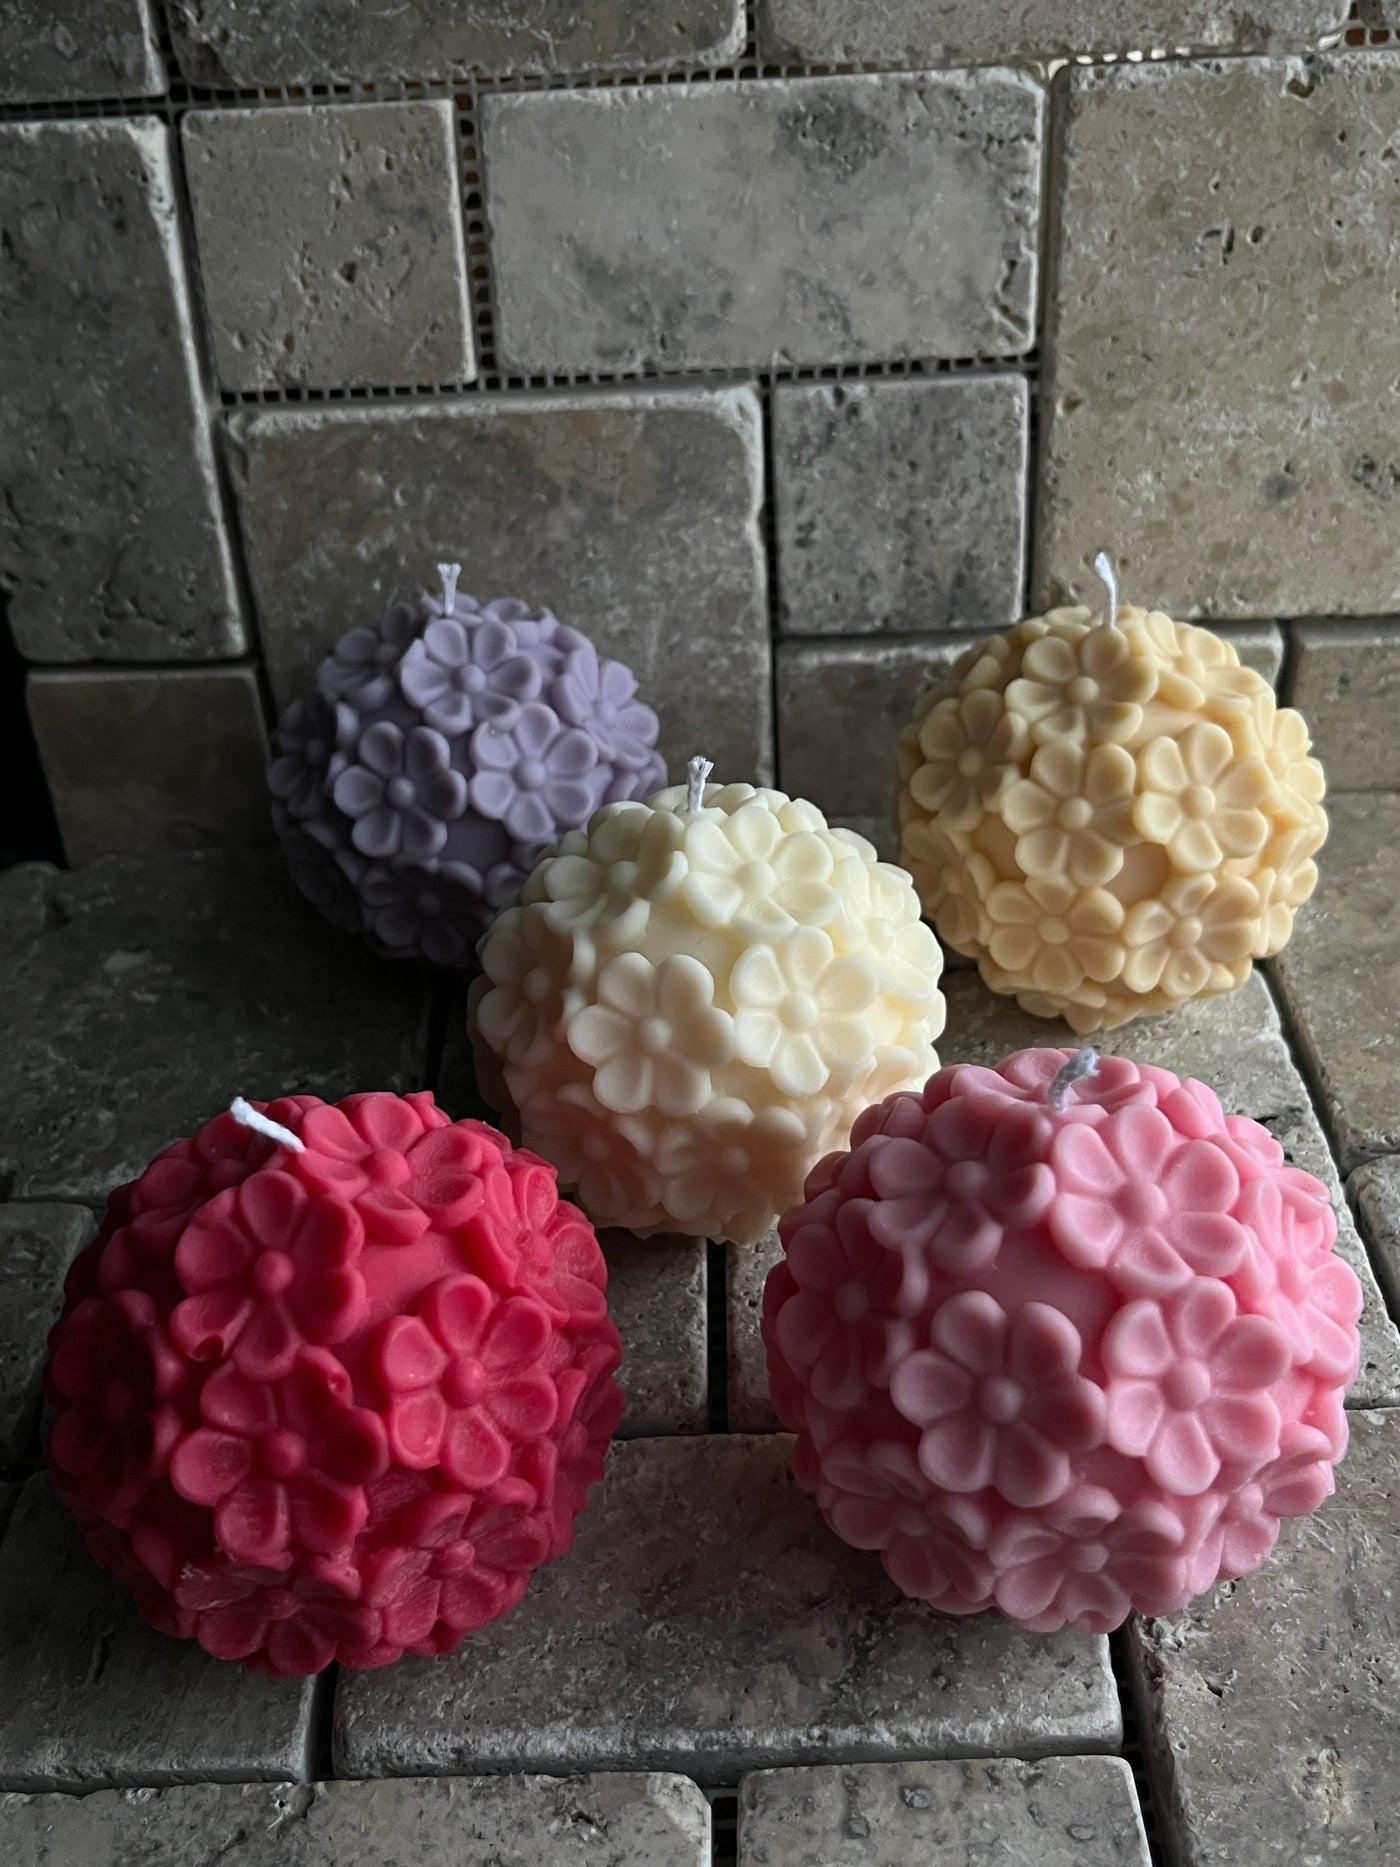 The Daisy Ball Flower Candle | Decorative Flowerball Candle